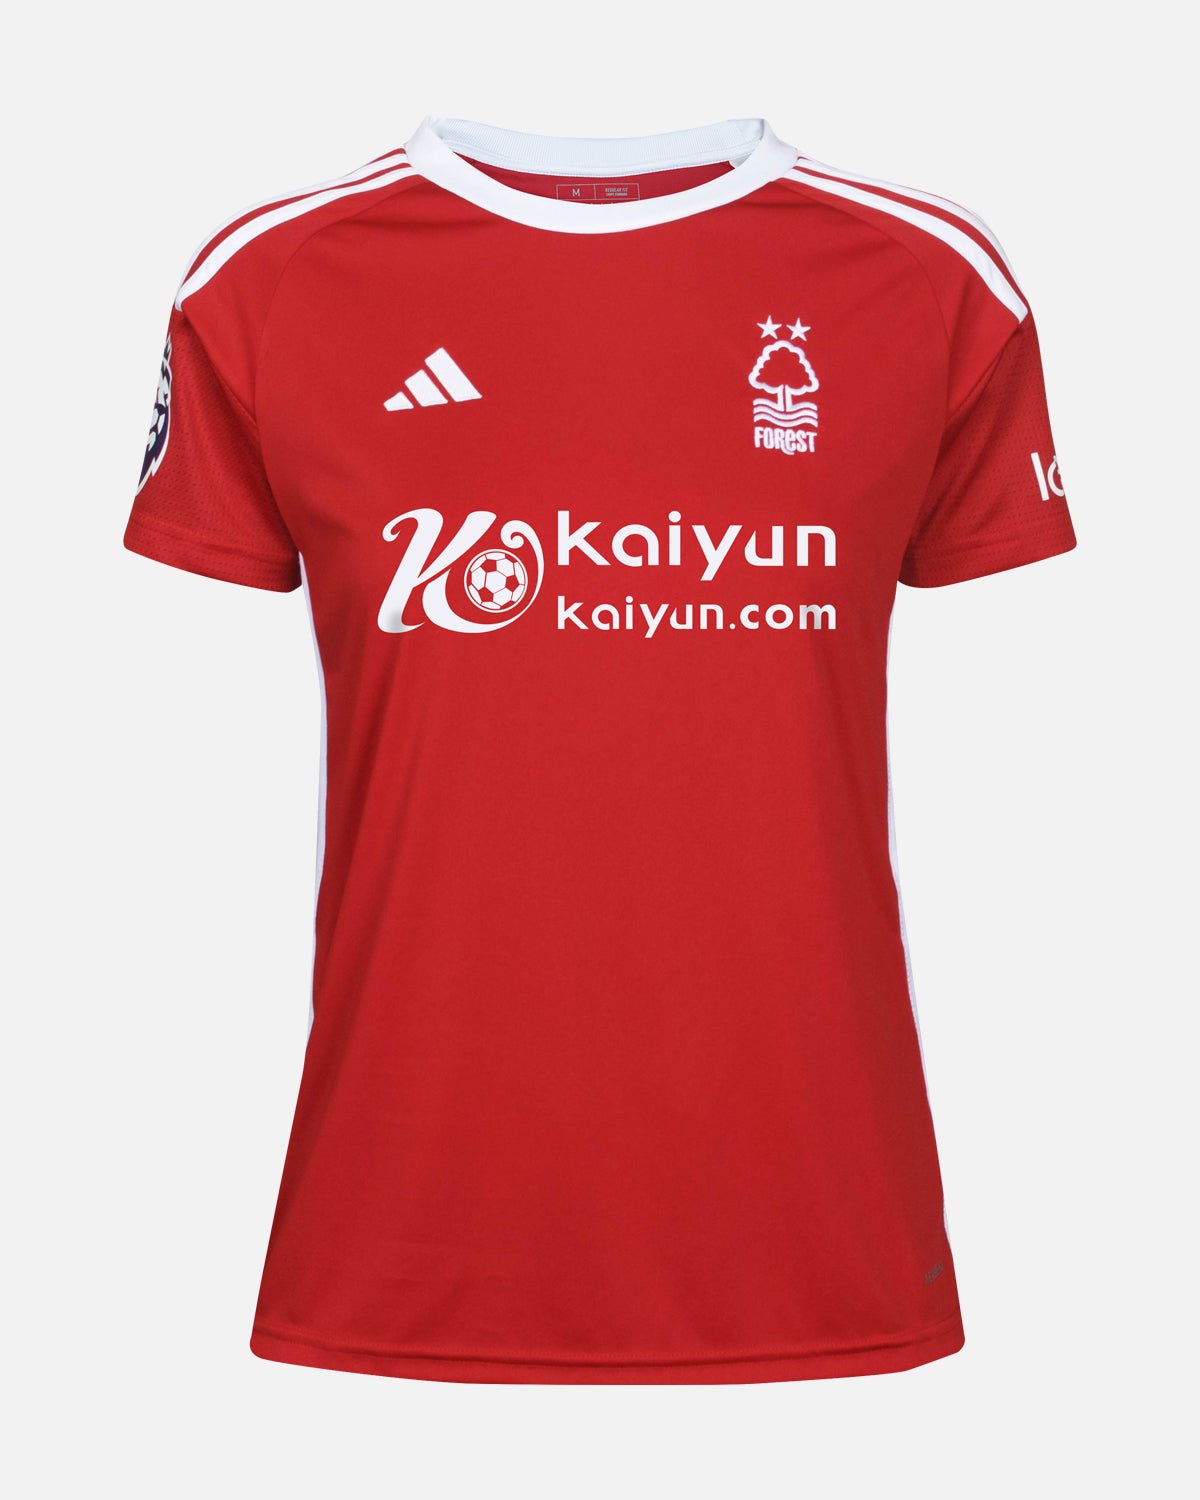 NFFC Women's Home Shirt 23-24 - Williams 7 - Nottingham Forest FC